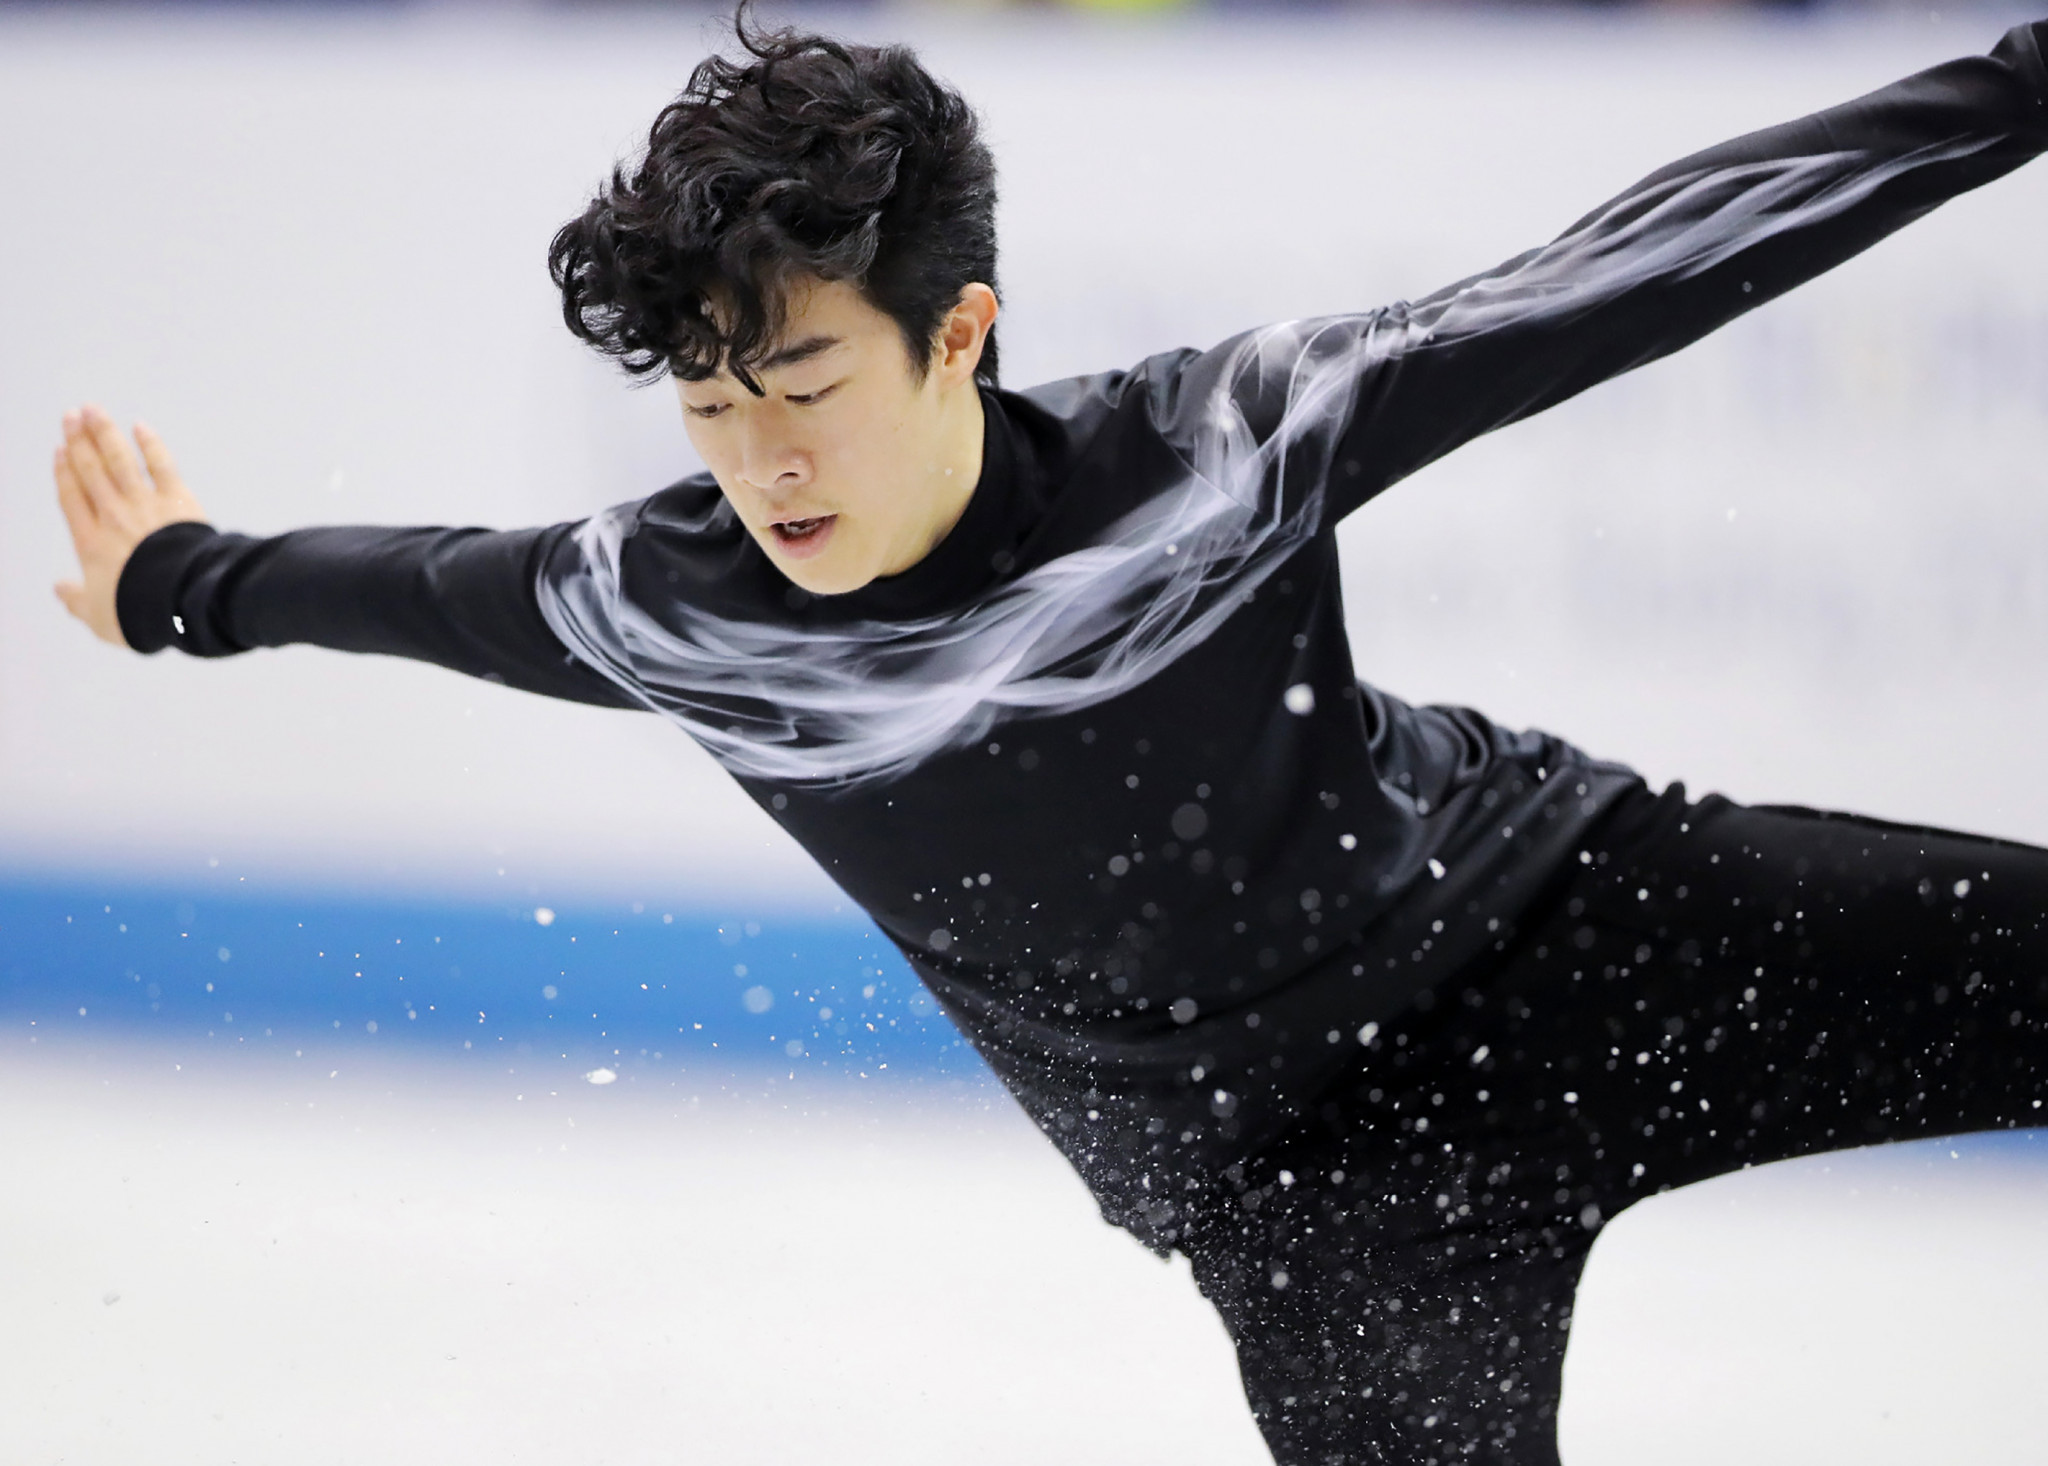 Nathan Chen will aim for a second victory of the season in the men's event ©Getty Images